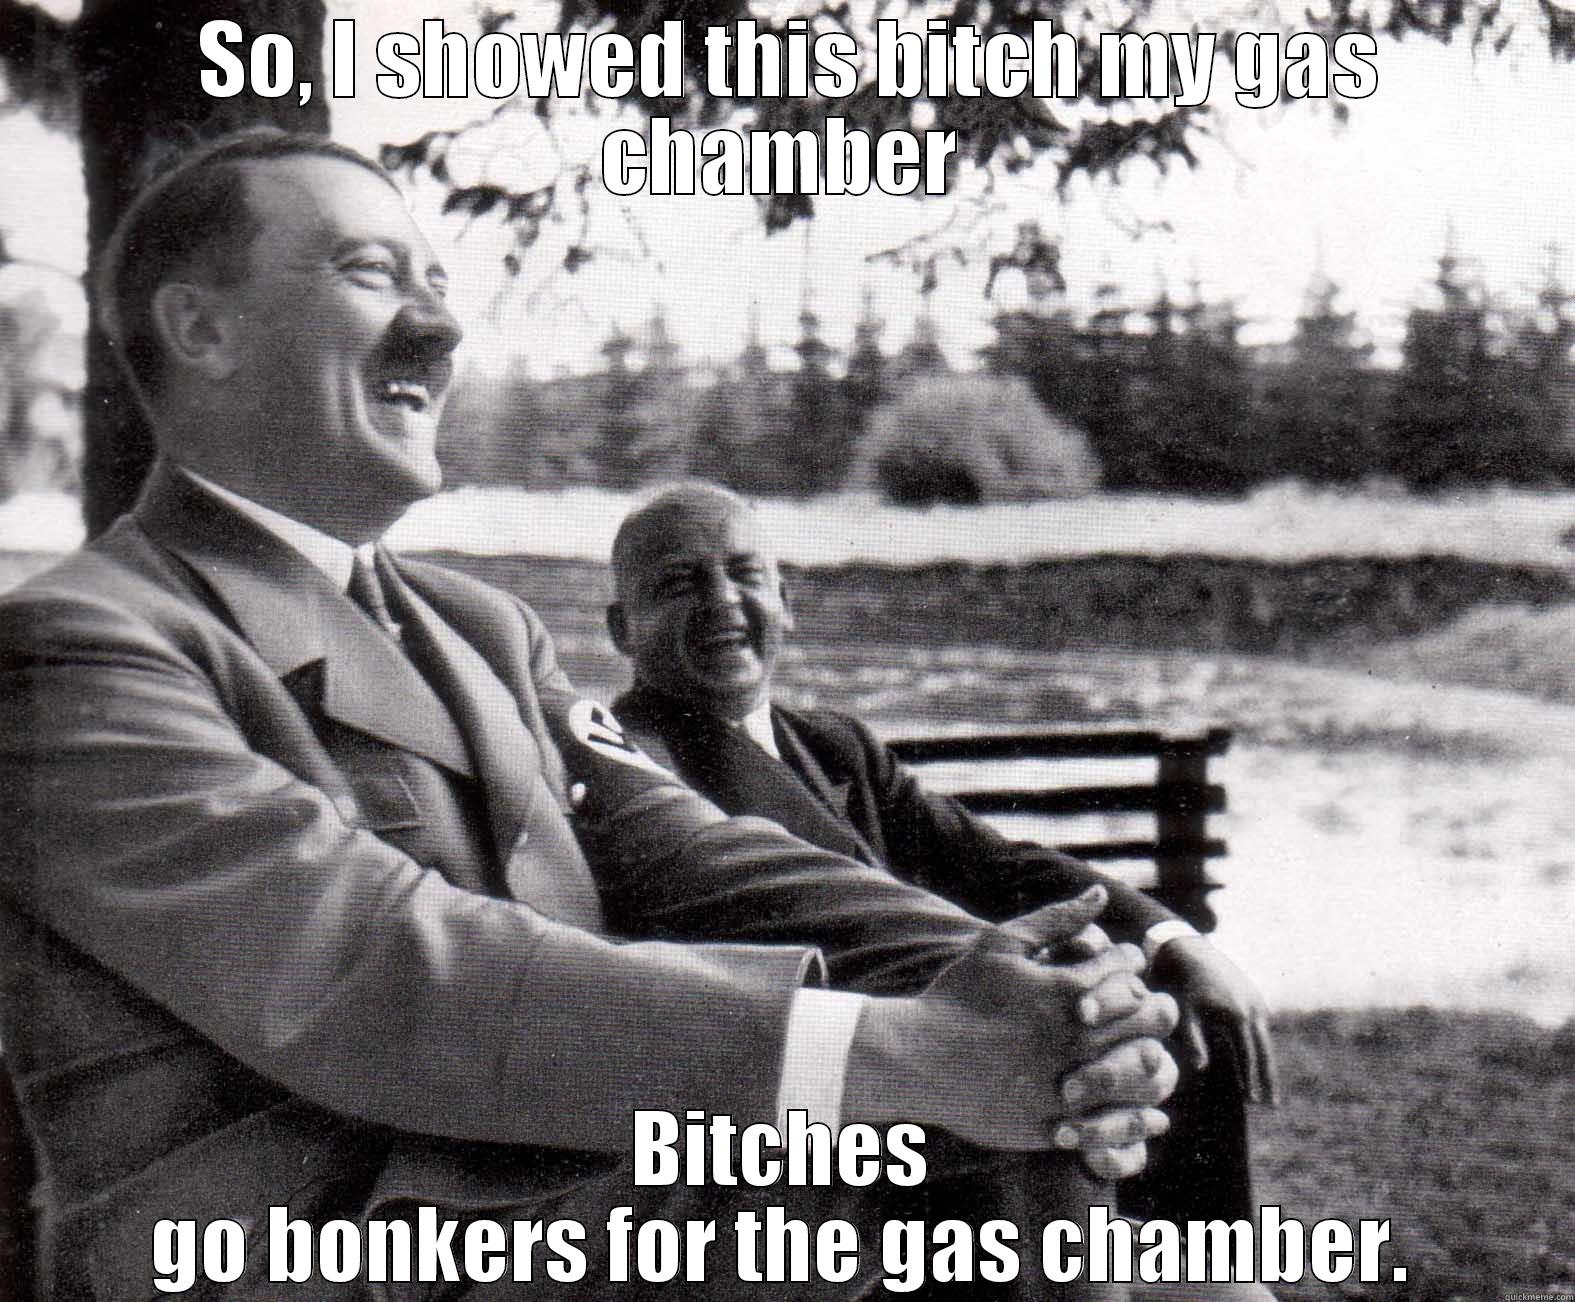  SO, I SHOWED THIS BITCH MY GAS CHAMBER BITCHES GO BONKERS FOR THE GAS CHAMBER. Misc